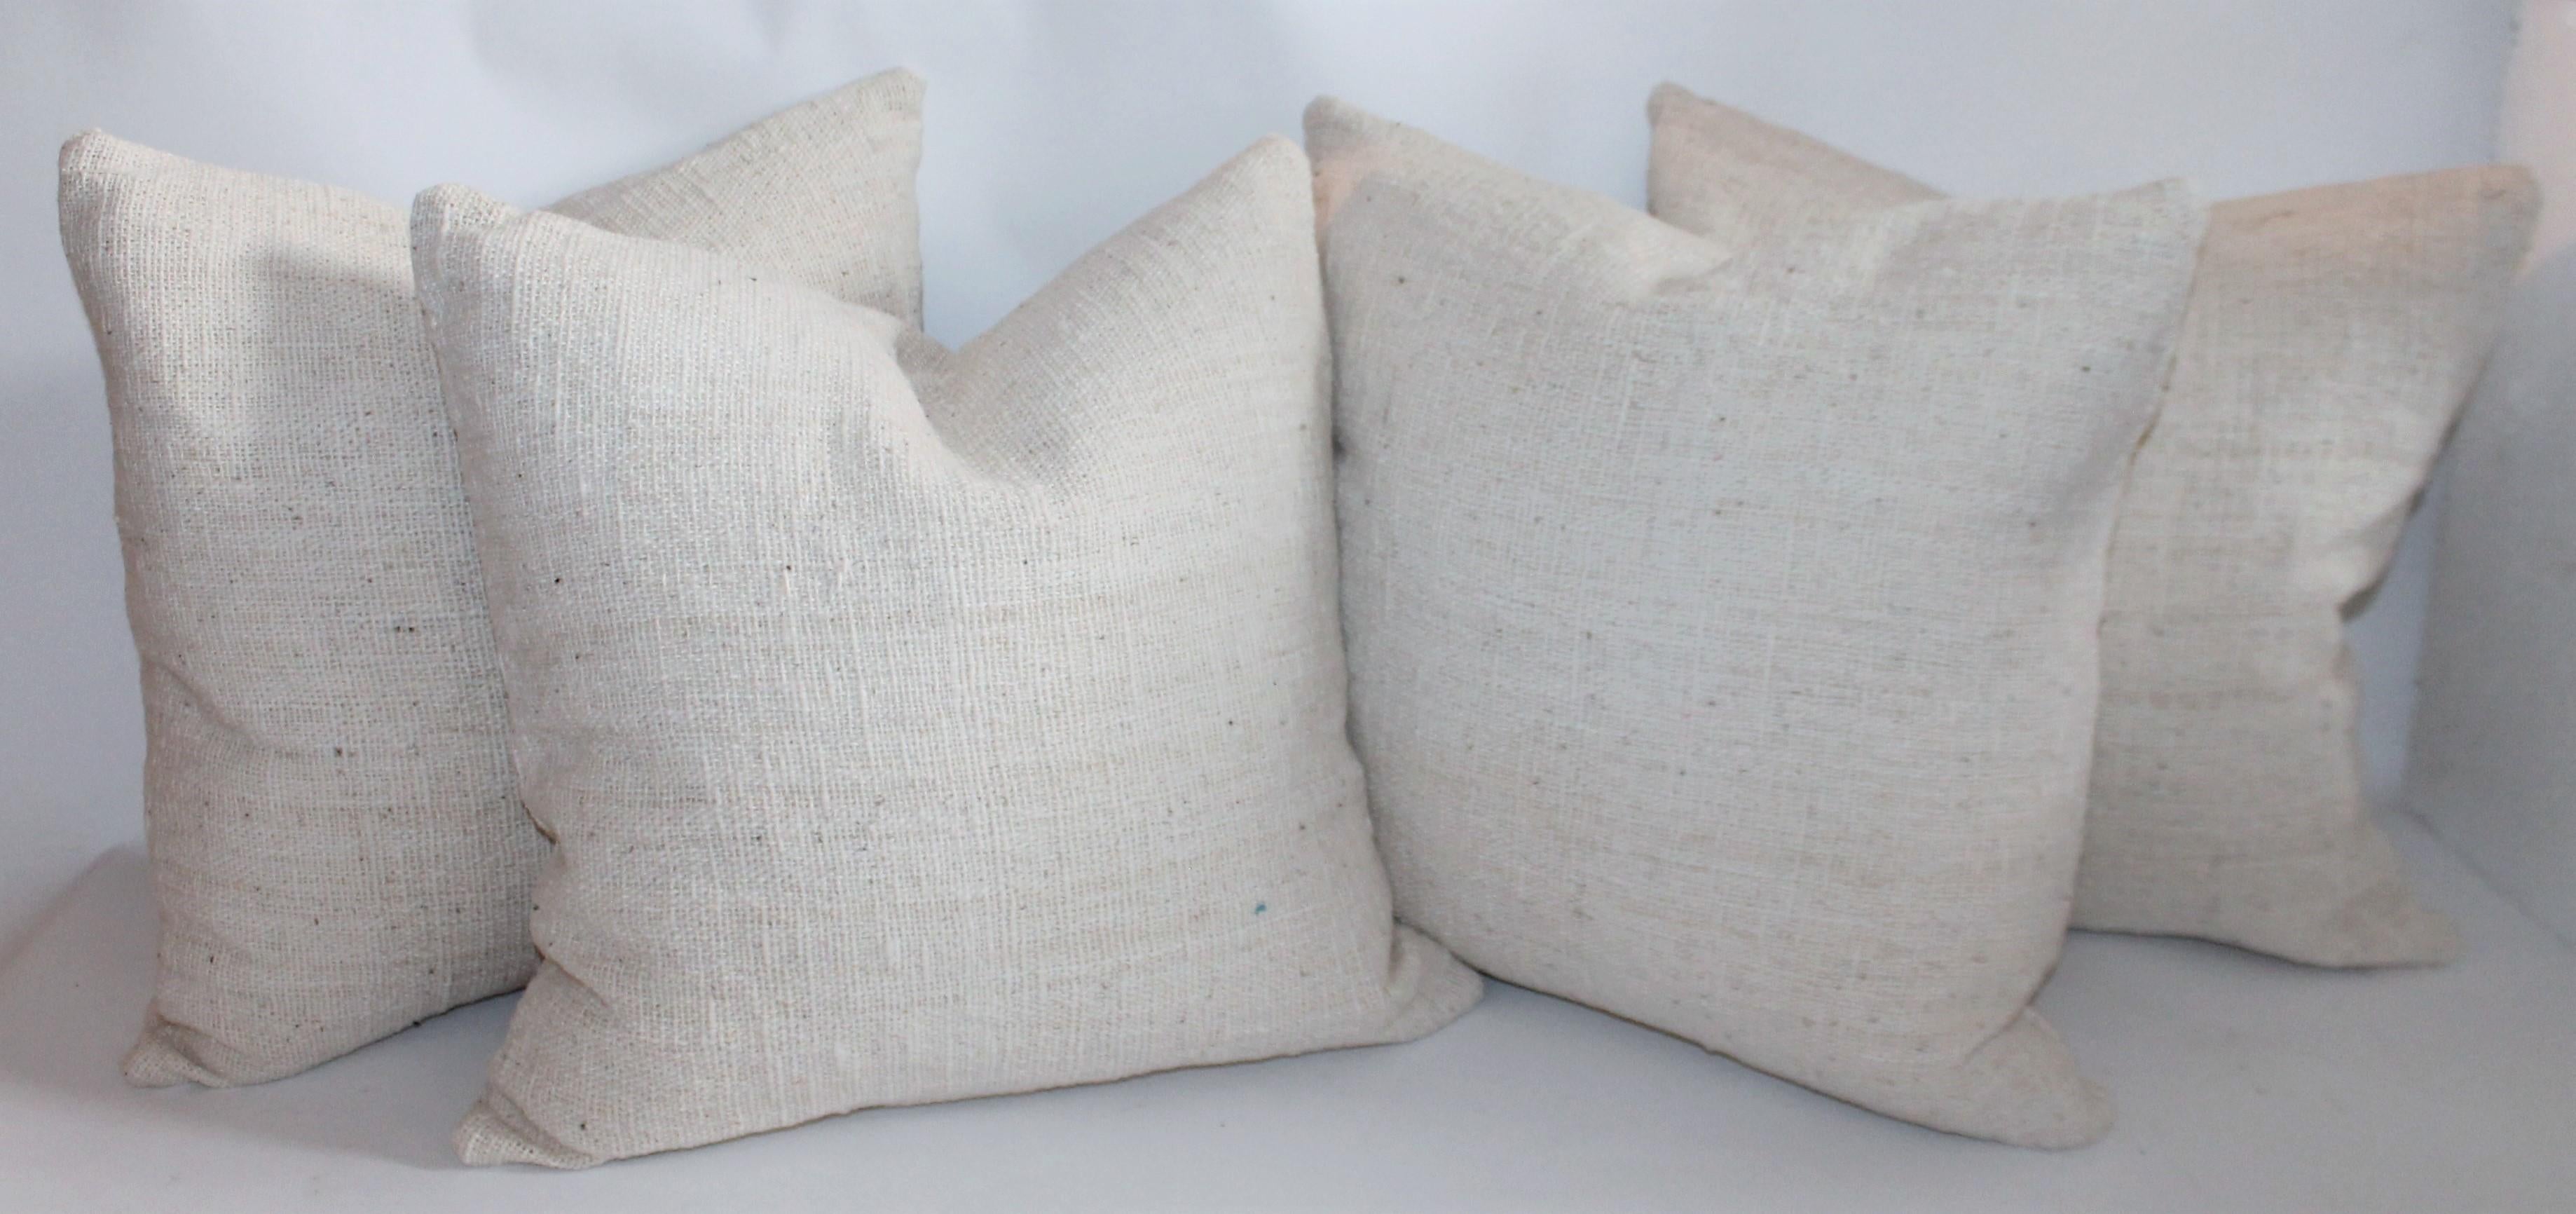 19th century homespun linen pillows that are reversible and down & feather fill. Sold as a group of four pillows These pillows are so organic and natural woven fabric.